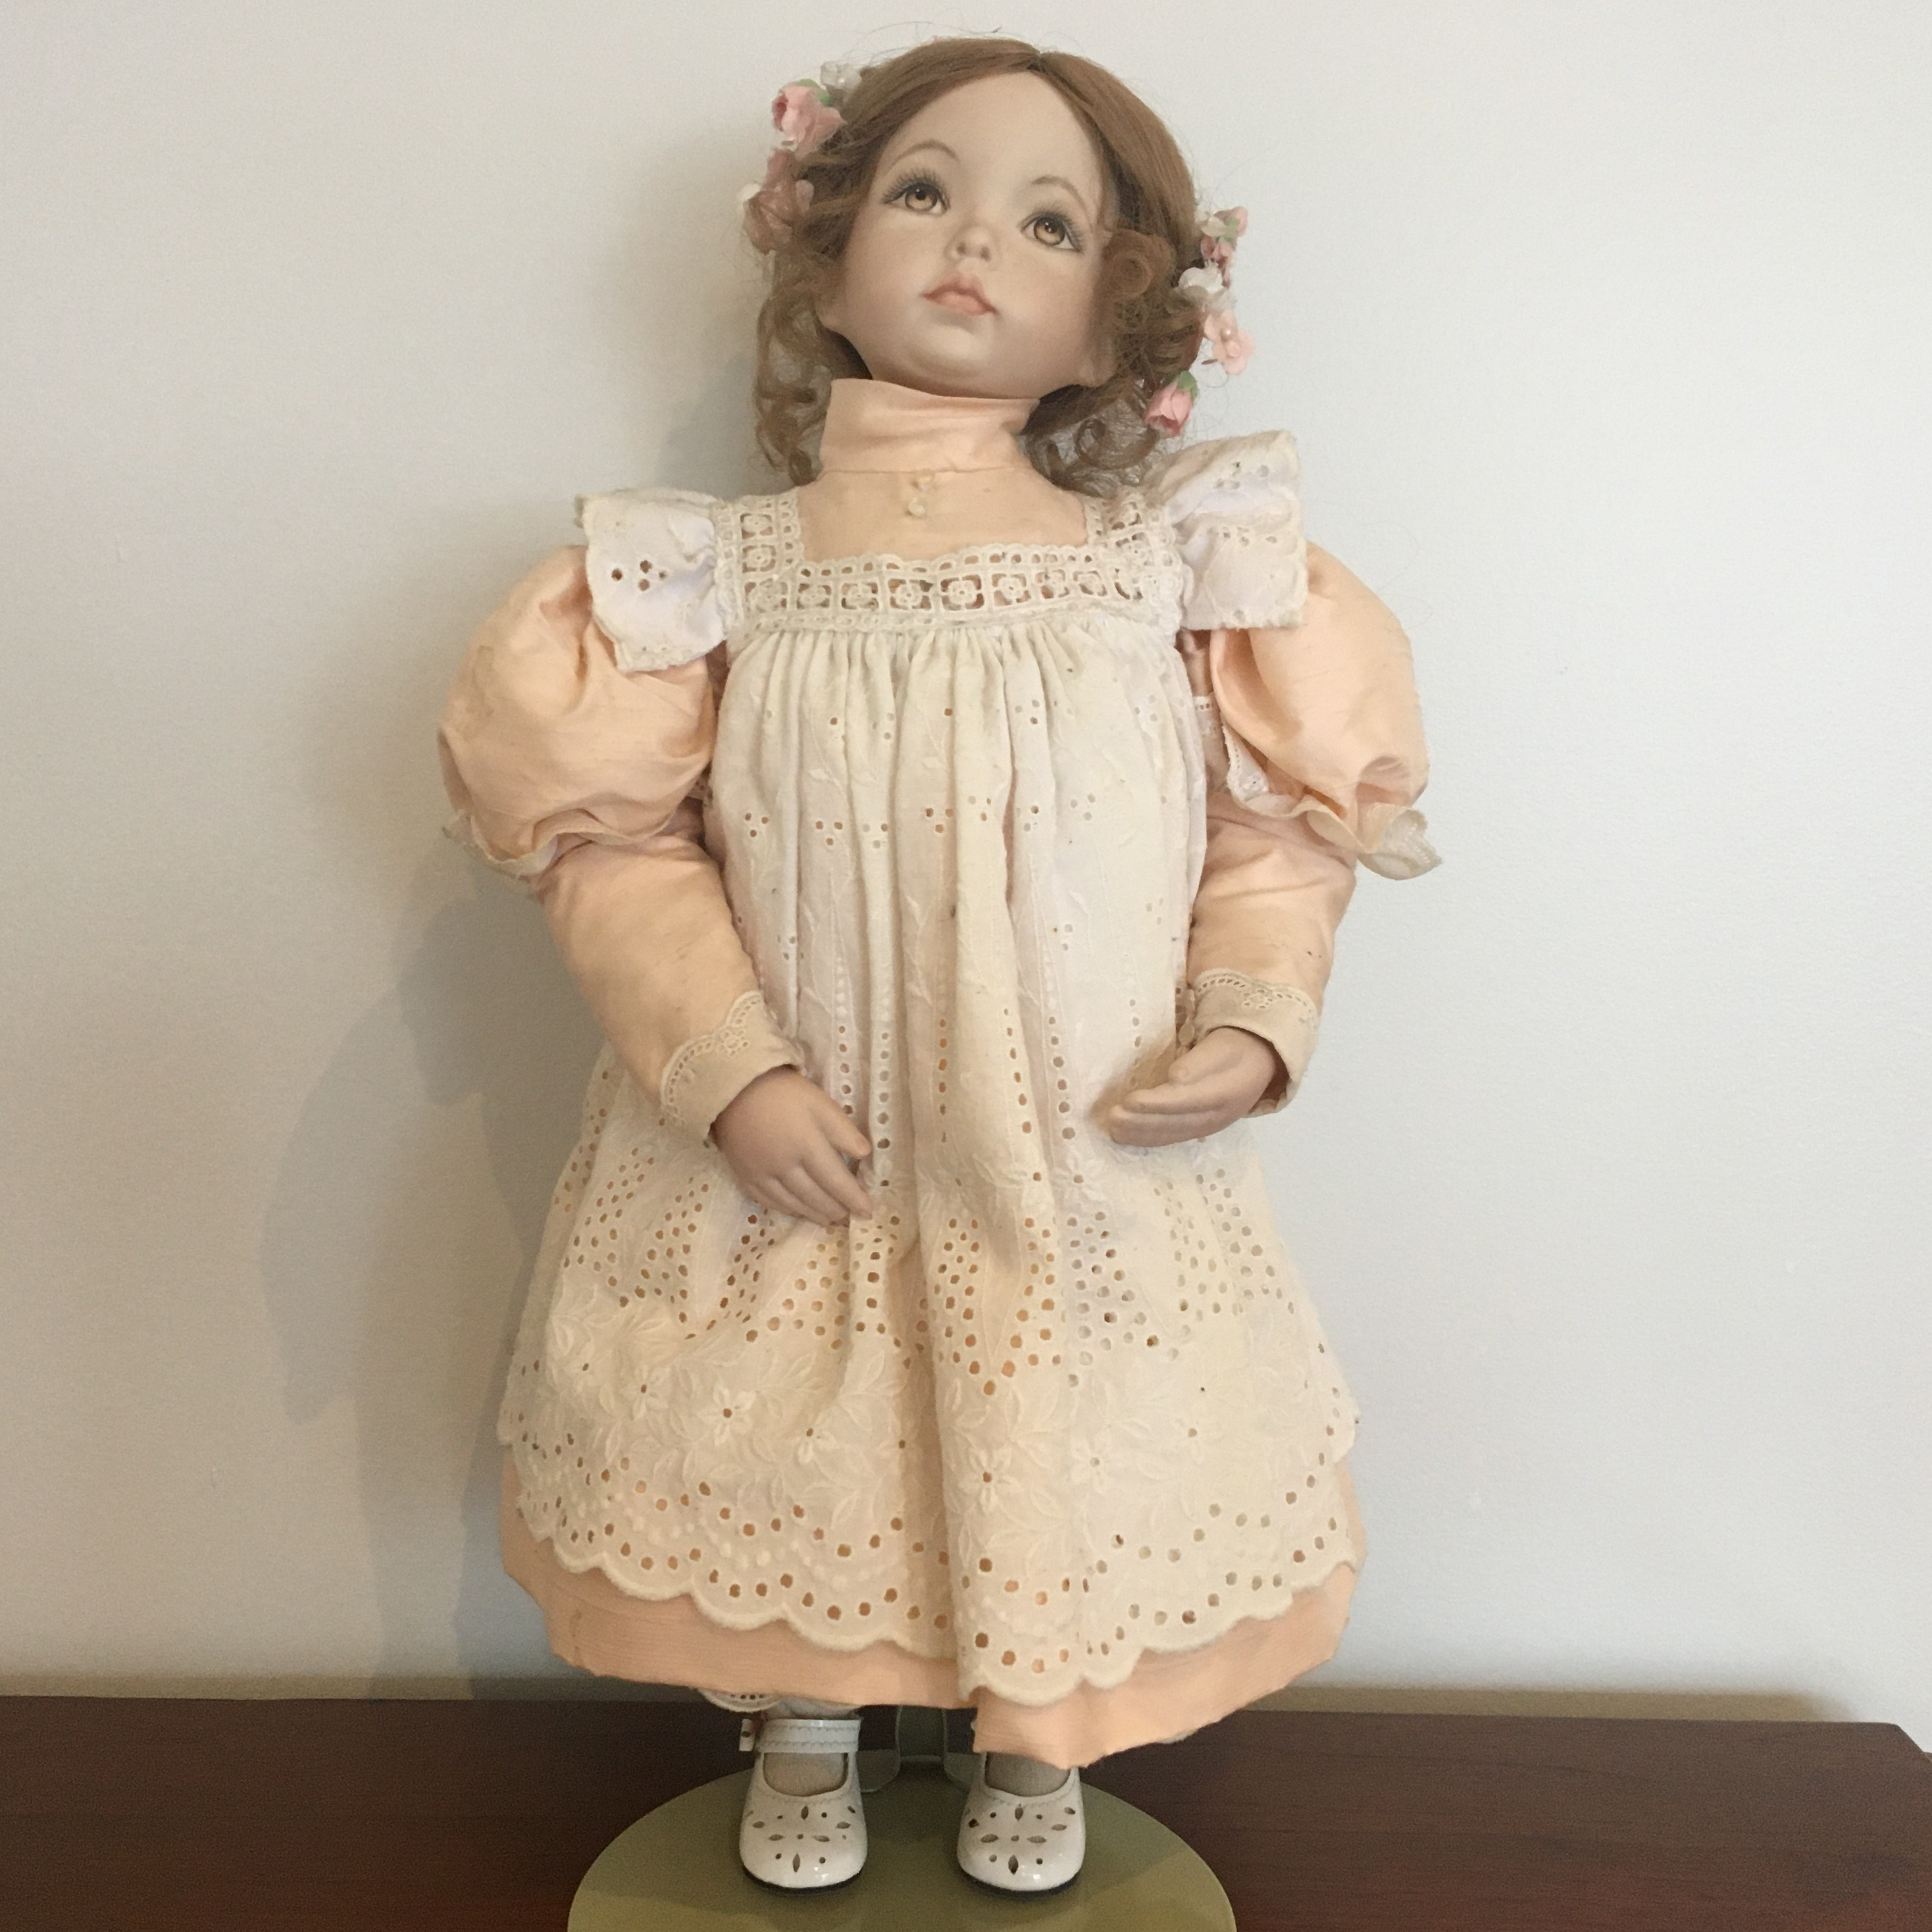 19-inch modern doll with brown hair in milkmaid braid with painted eyes and peach dress with white pinafore